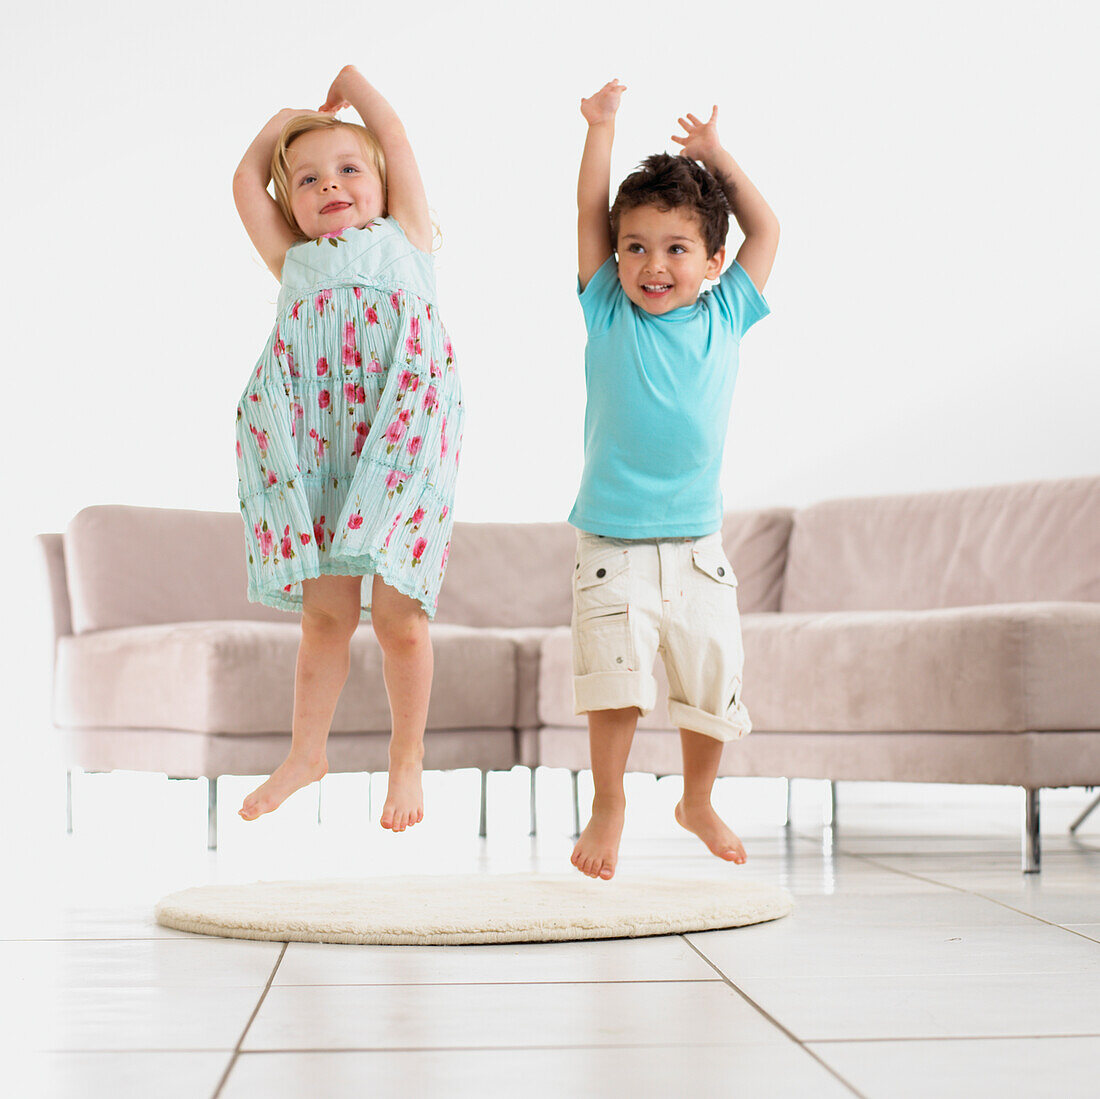 Girl and boy jumping up from a rug in a living room